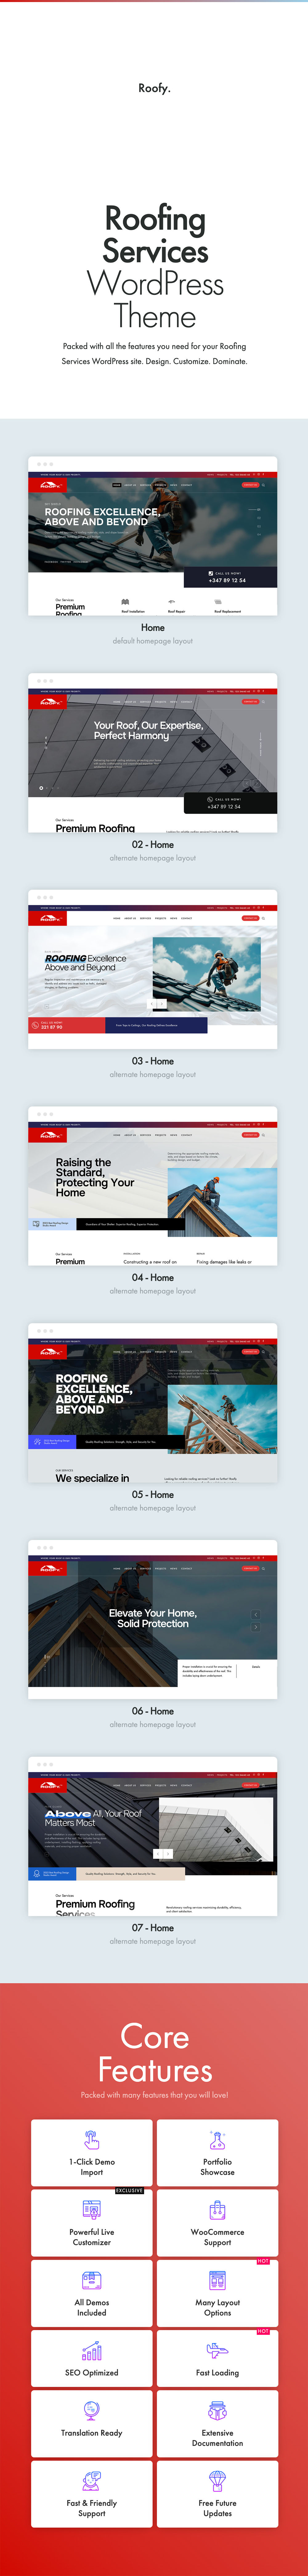 Roofy - roofing services theme by pixelwars